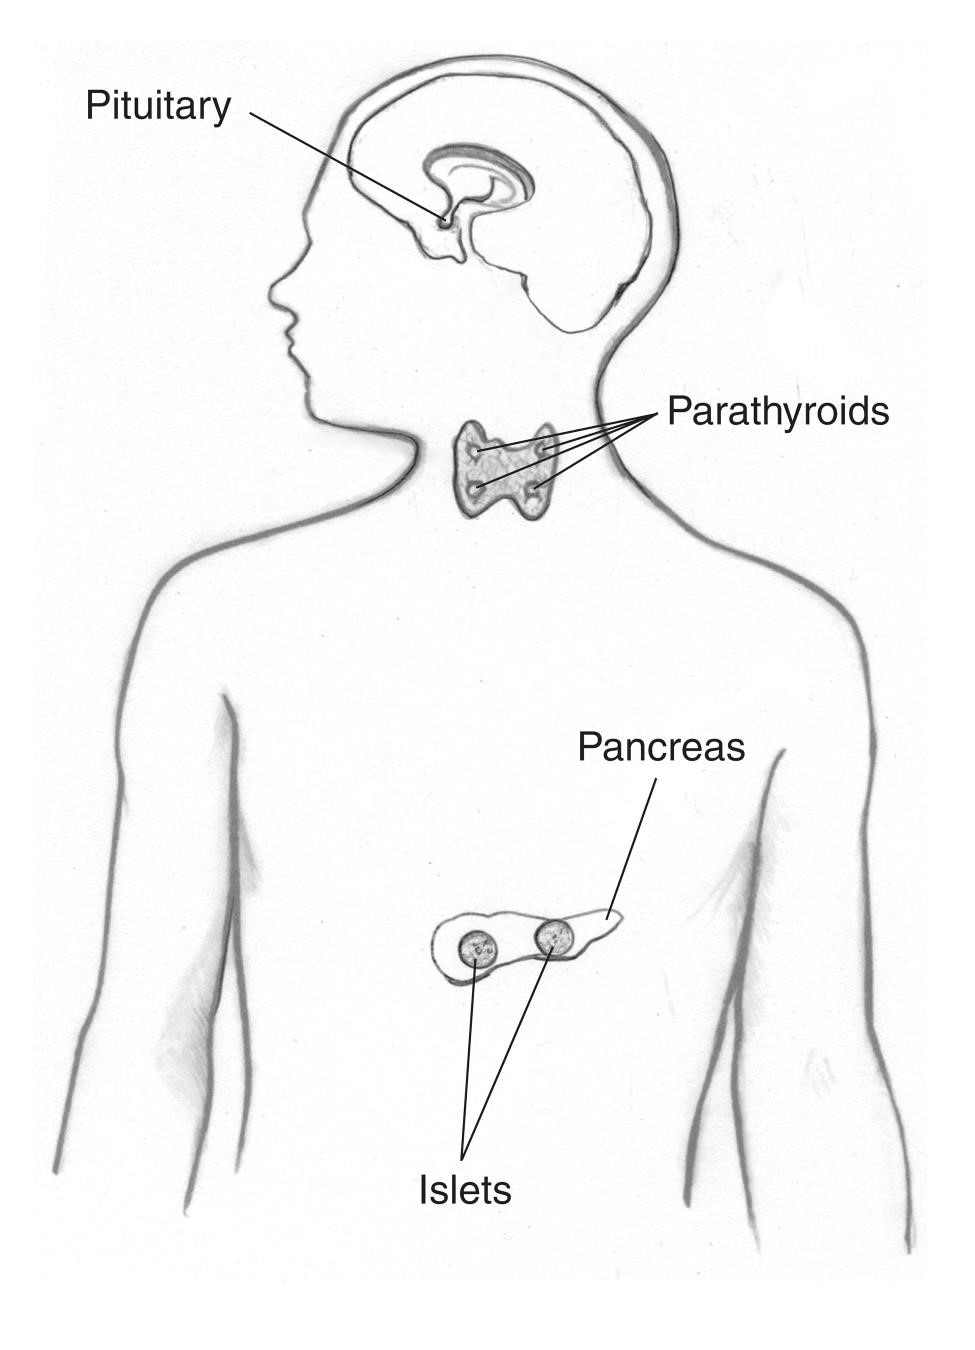 four endocrine glands in the neck region